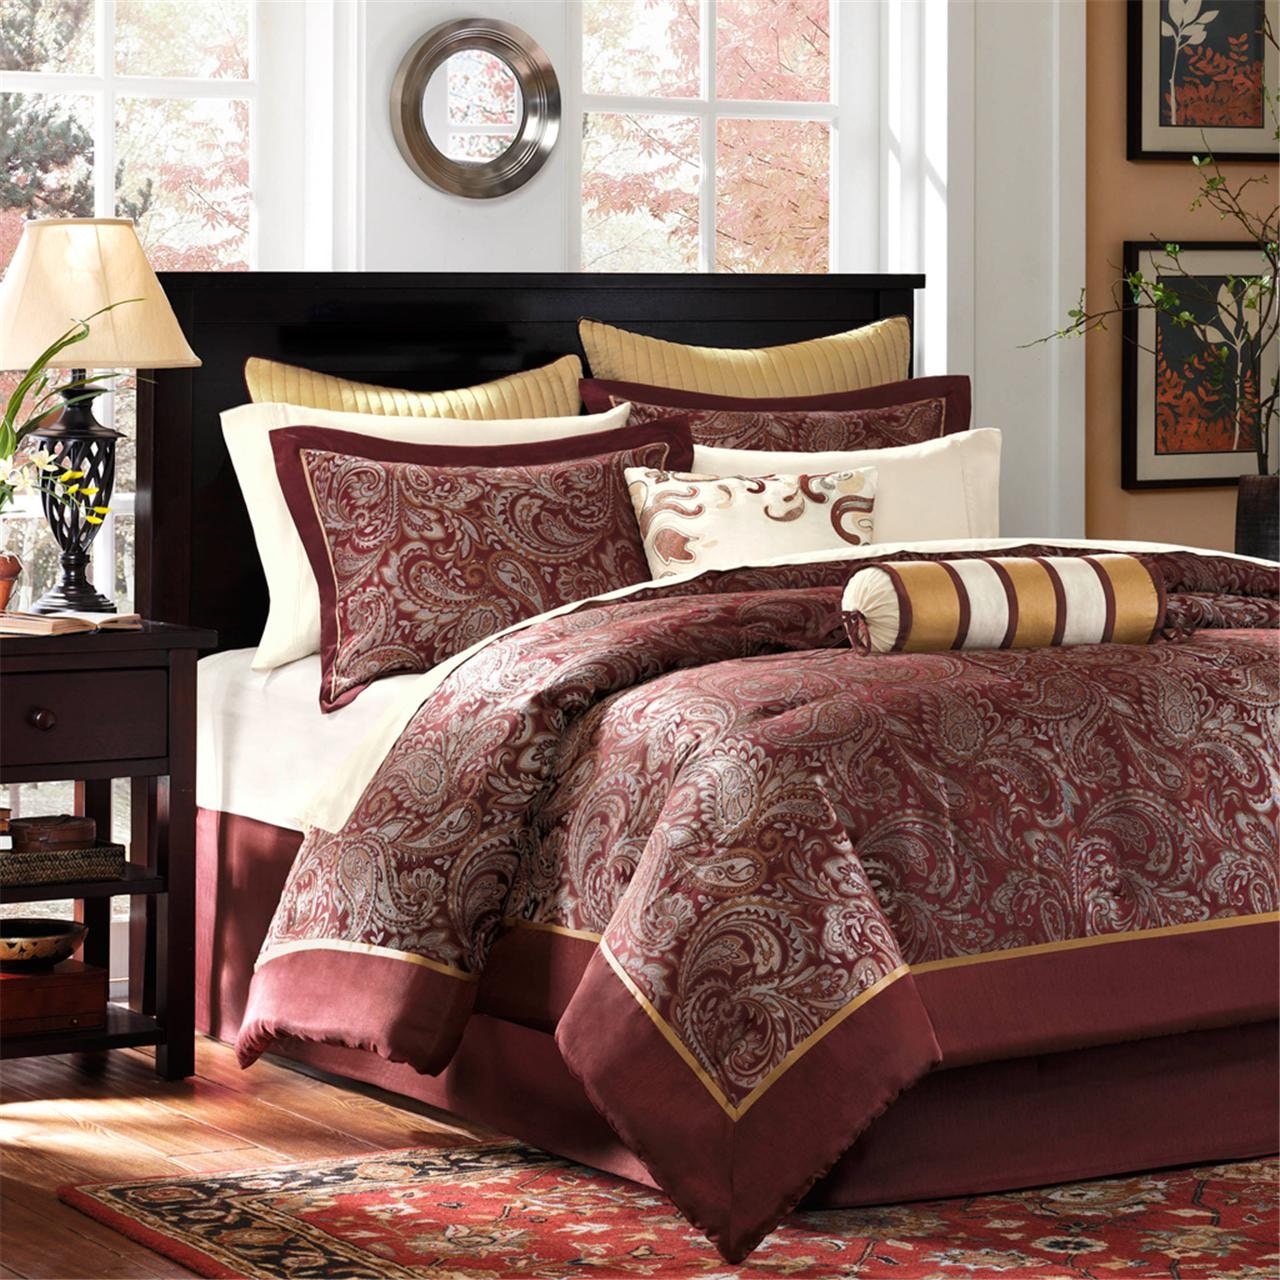 HIG 7 Piece Burgundy and Gold Faux Silk Fabric Embroideried Bedding Set,  Queen 